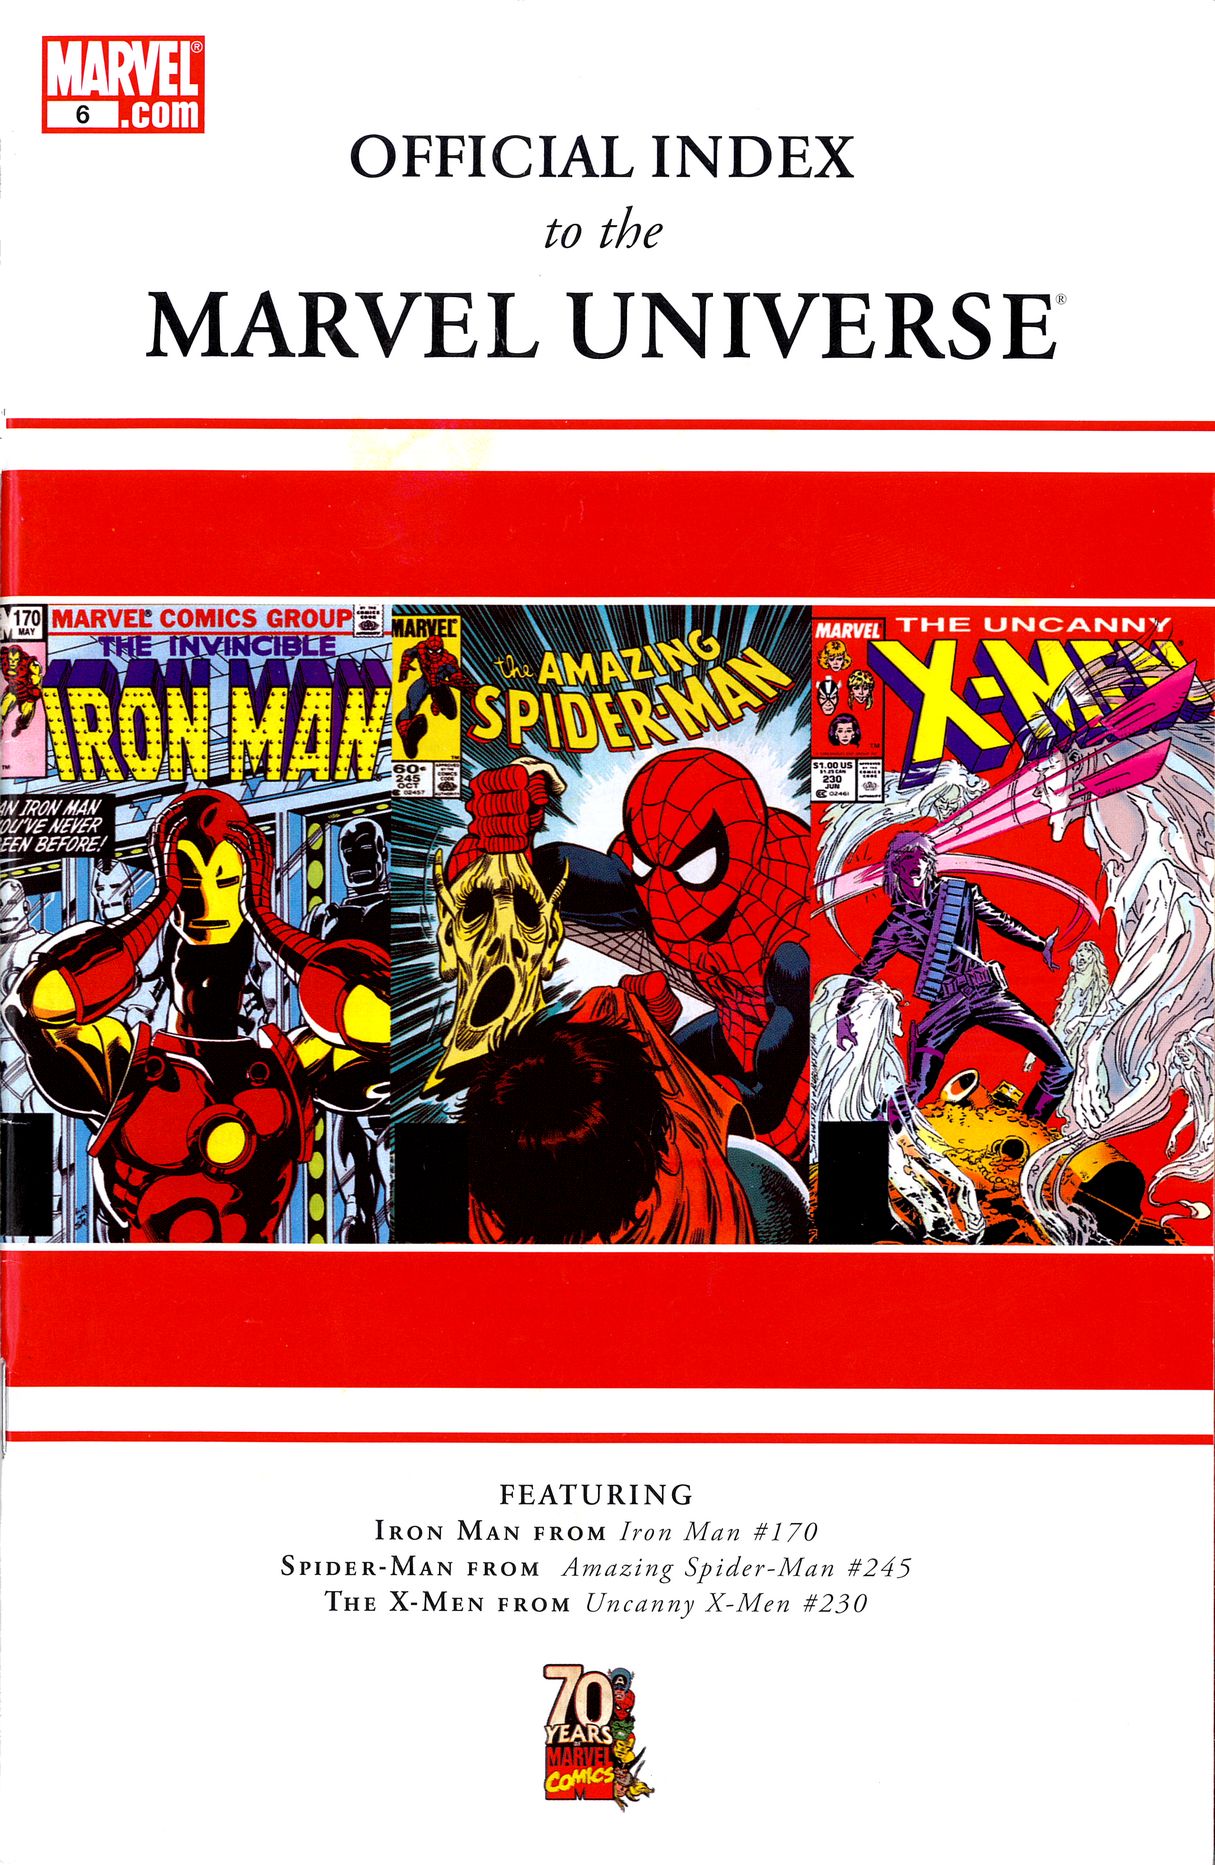 Read online Official Index to the Marvel Universe comic -  Issue #6 - 1